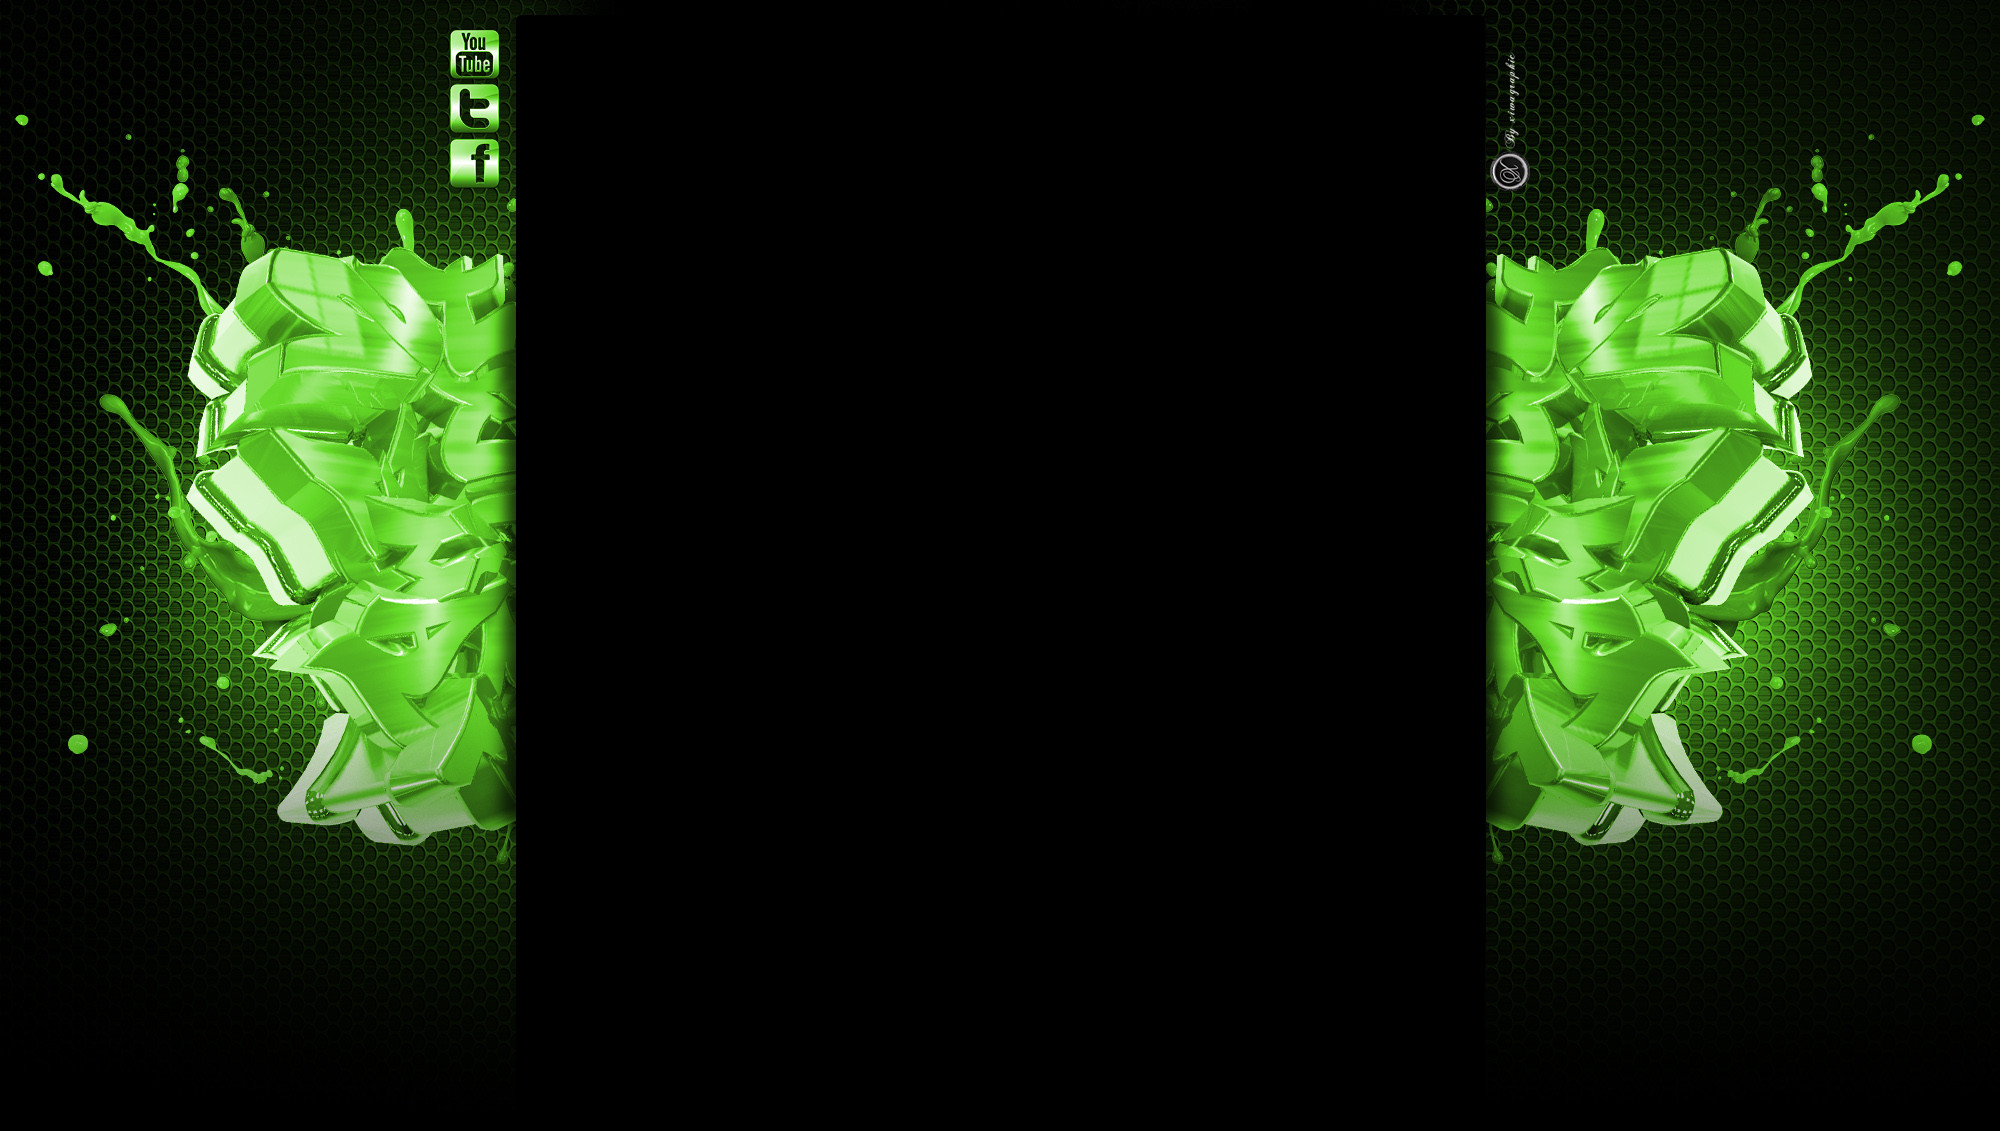 2000x1131 Cool Gaming Backgrounds For Youtube 2013 Background youtube thimy .